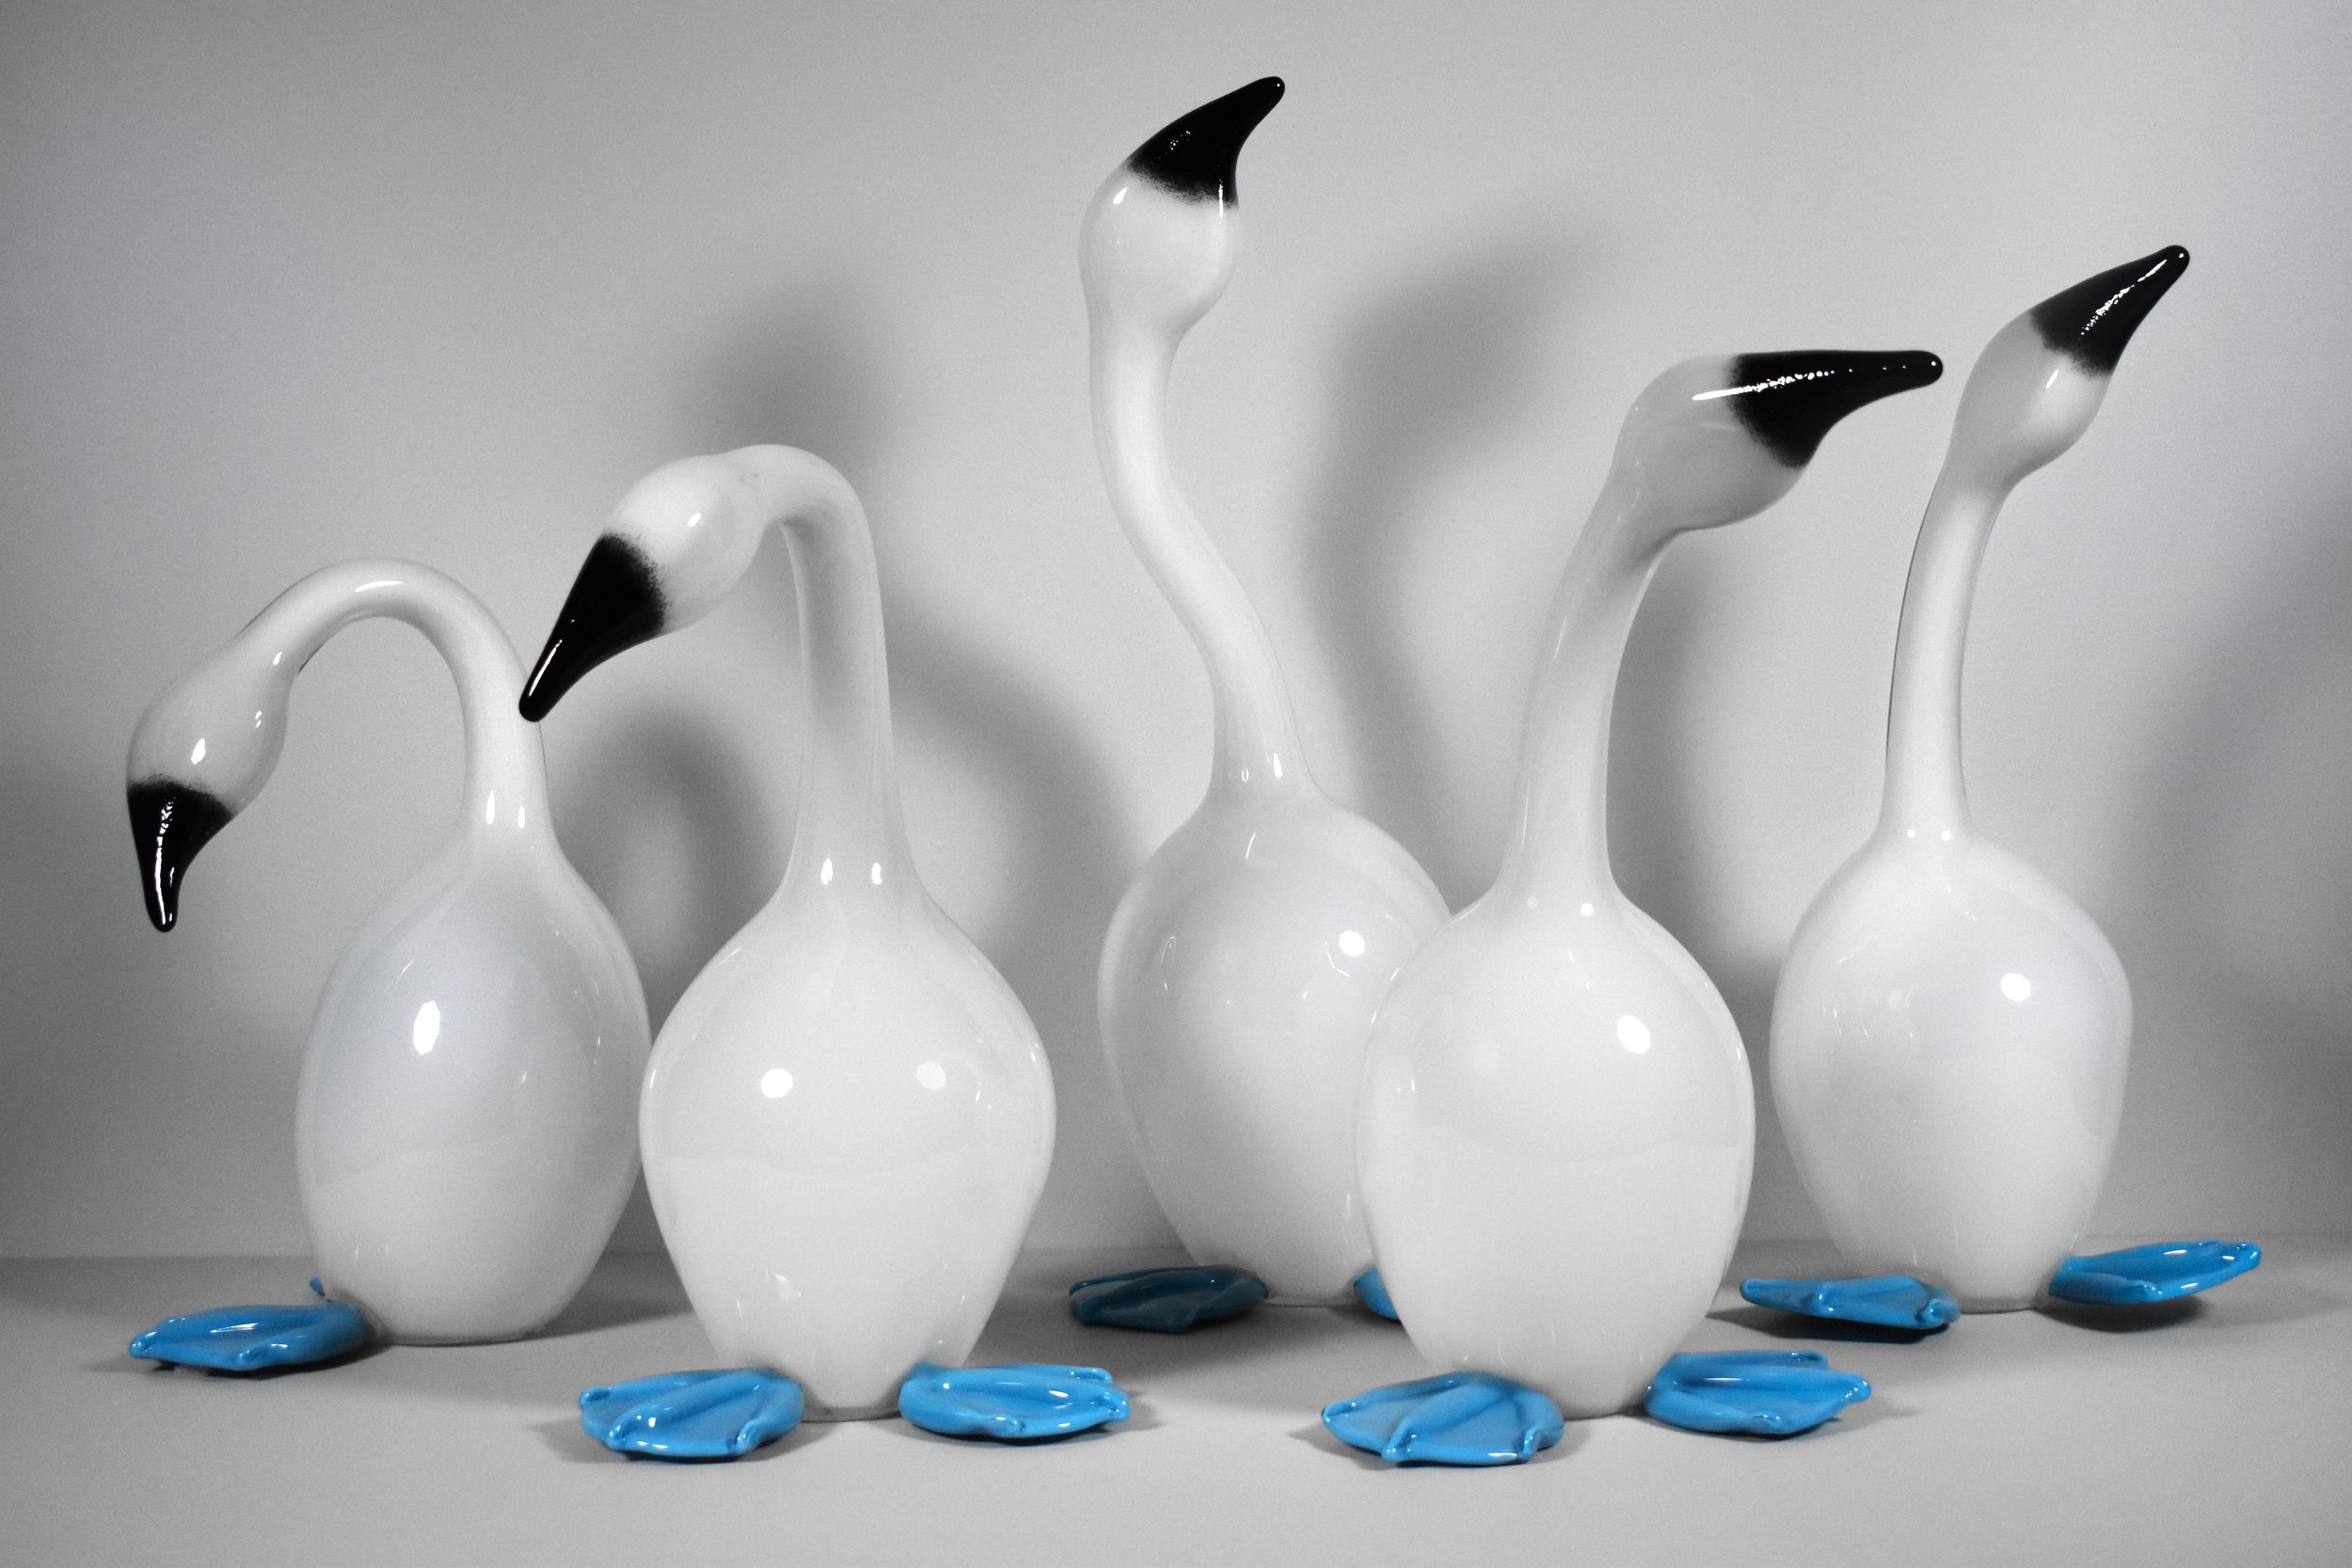  Erich Woll (American, born 1970).&nbsp; Mistakes Will Be Made (Blue-Footed Boobies) , 2014.&nbsp;Hot-sculpted glass.&nbsp;Collection of Museum of Glass, Tacoma, Washington, Gift of the artist. Photo by Mark Aimerito. 